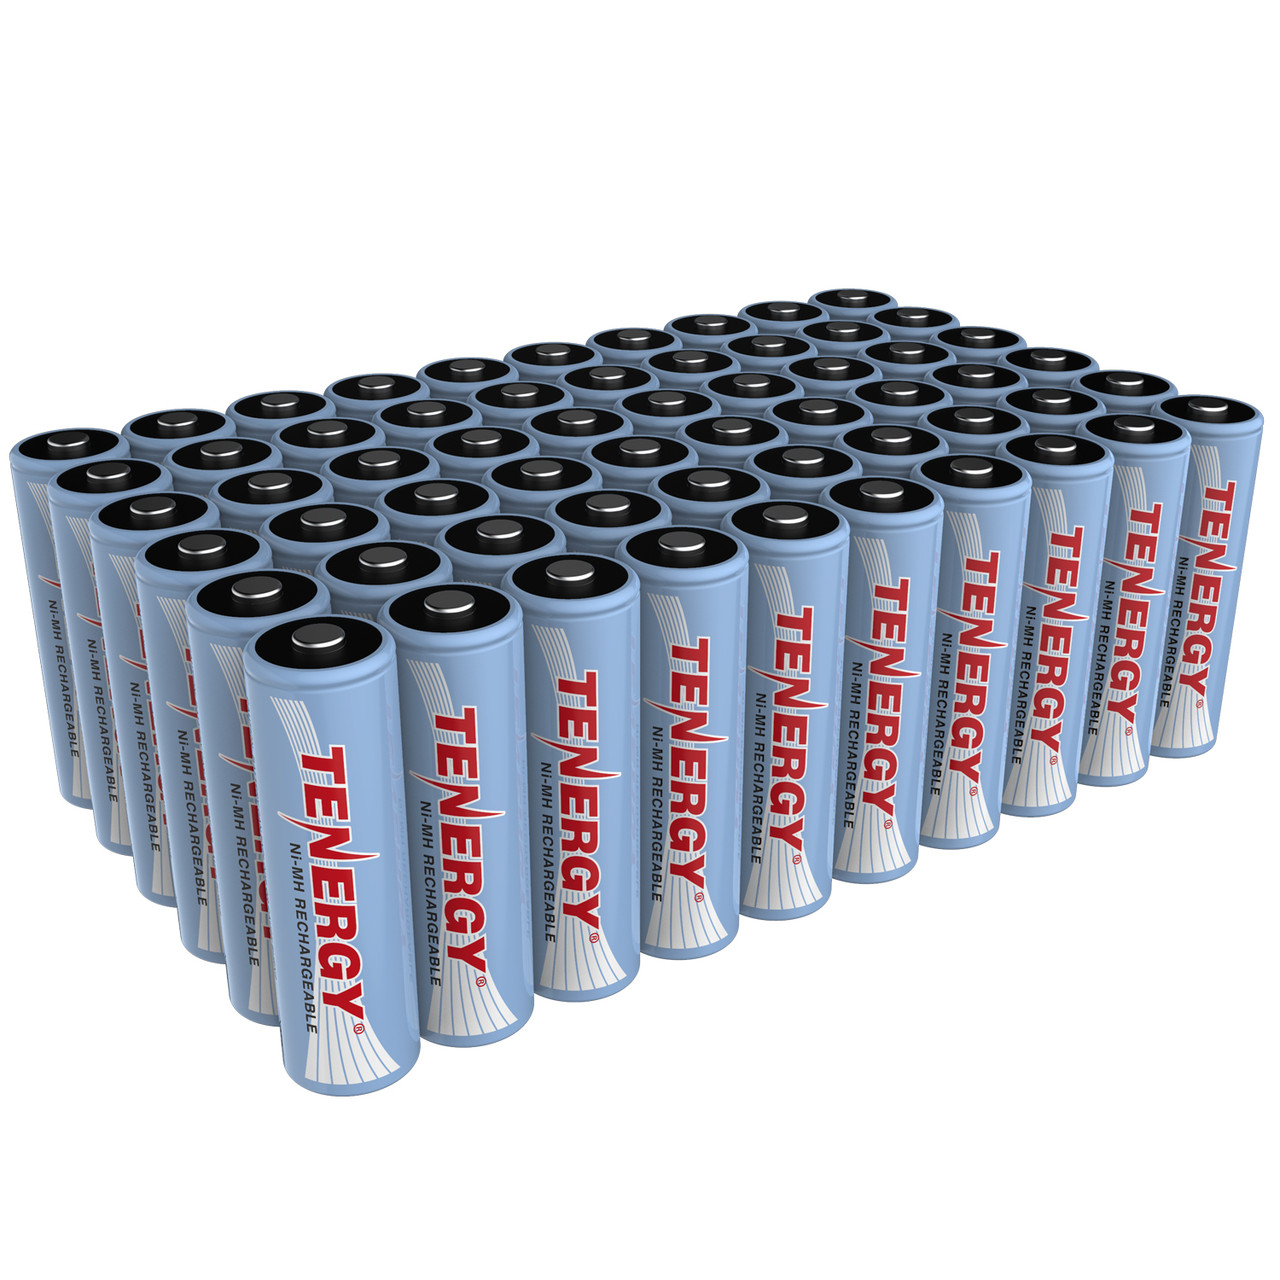 Tenergy 3.7V RCR123A Li-ion Rechargeable Batteries for Arlo Security Camera